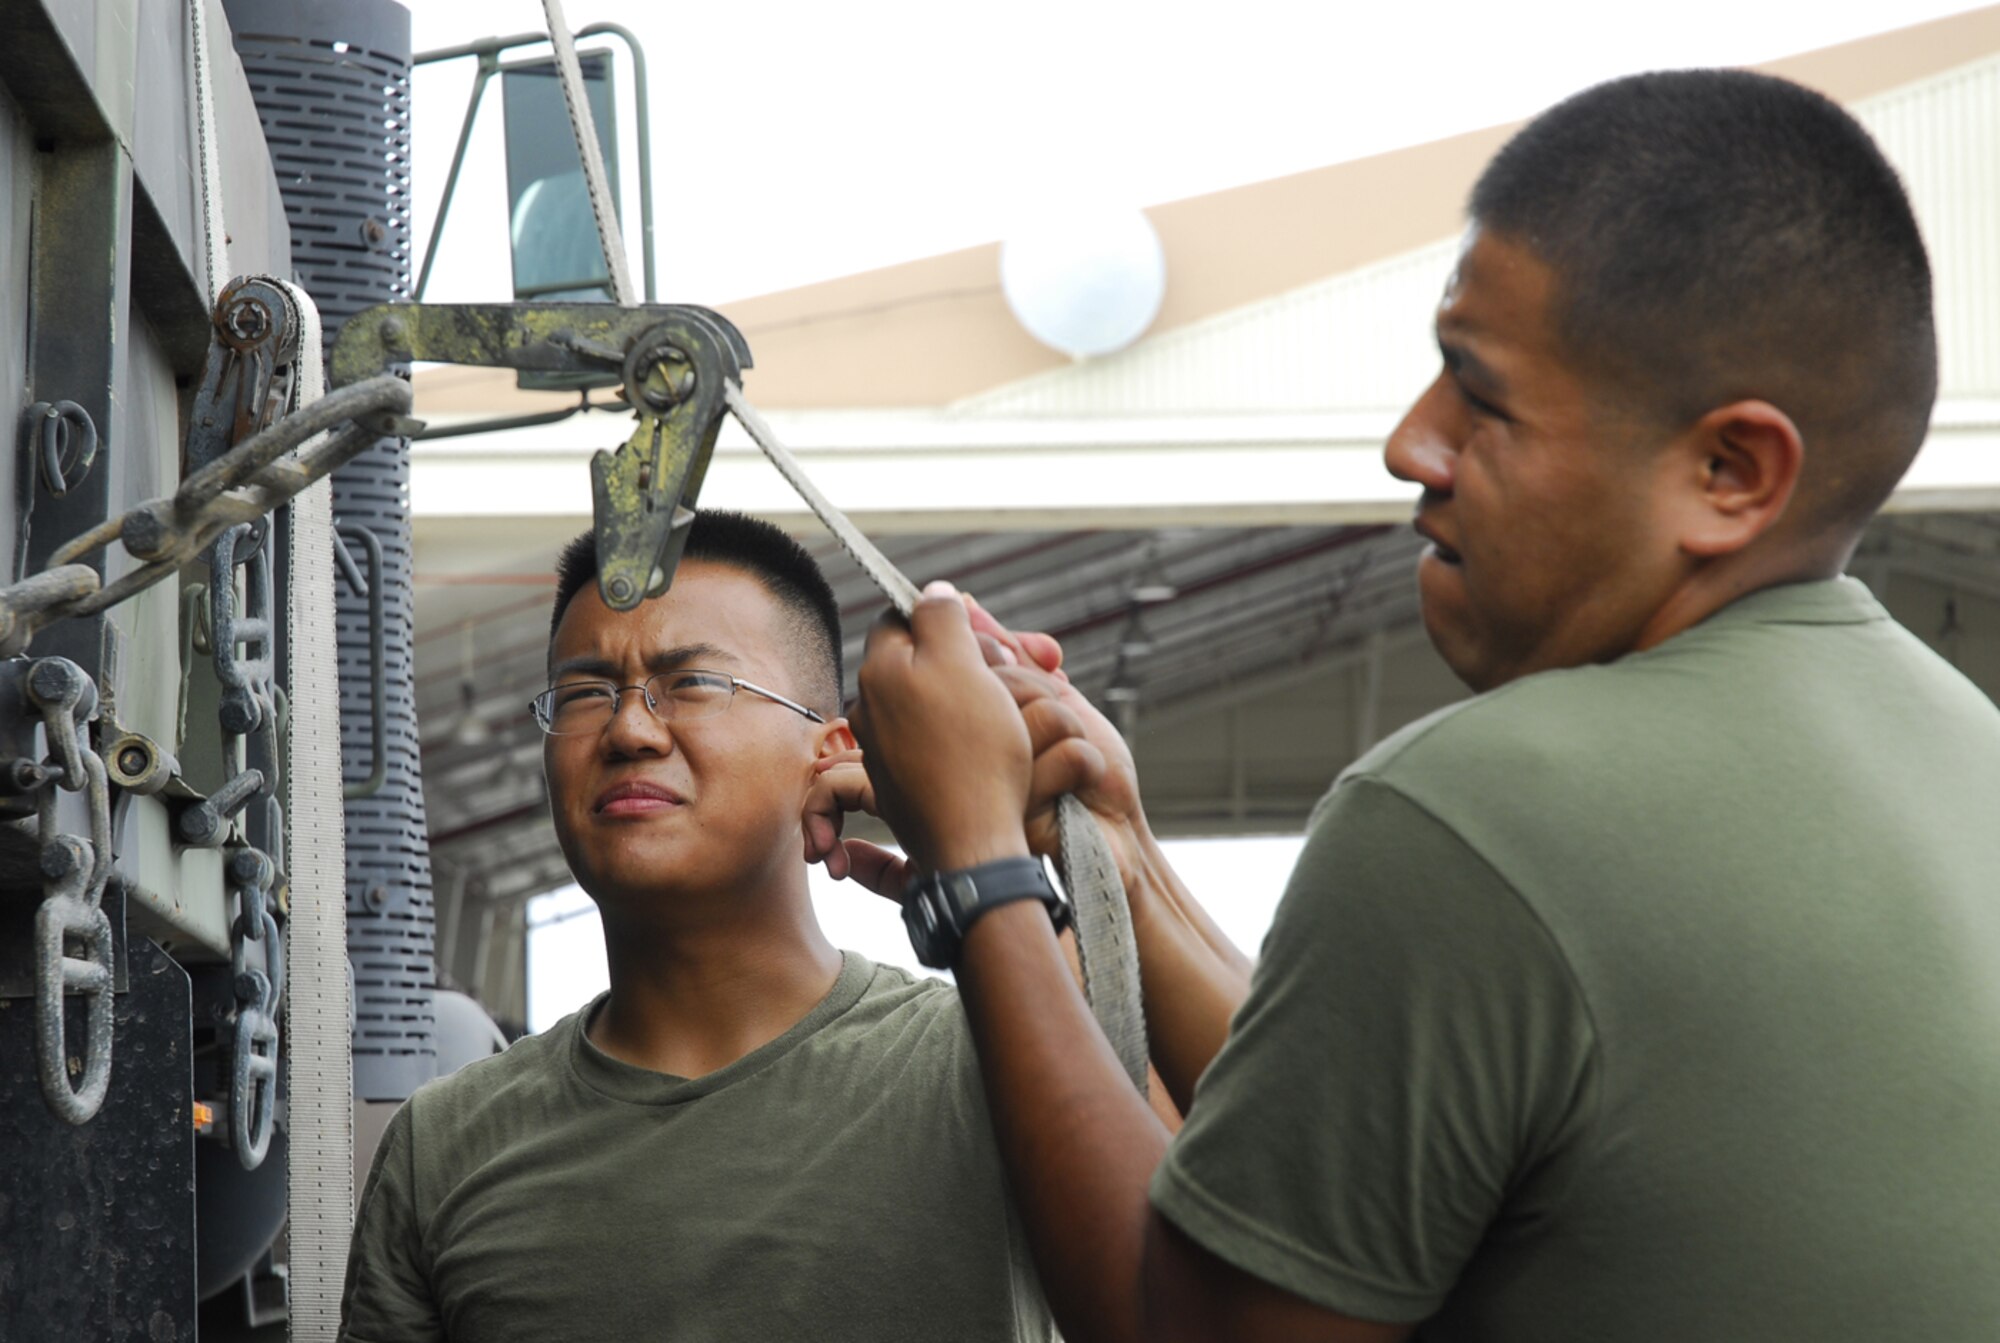 Lance Cpl. Saysavanh Mainvong watches as Cpl. Samuel Kee secures containers onto a truck before relocating them to a secure building at Kadena Air Base, Japan, July 12, 2007 in preparation for Typhoon Man-Yi. The typhoon is the first of the year for Okinawa, is expected to make landfall Friday. The corporals are assigned to Marine Wing Liasion Kadena.  U.S. Air Force photo/Airman 1st Class Sheila deVera